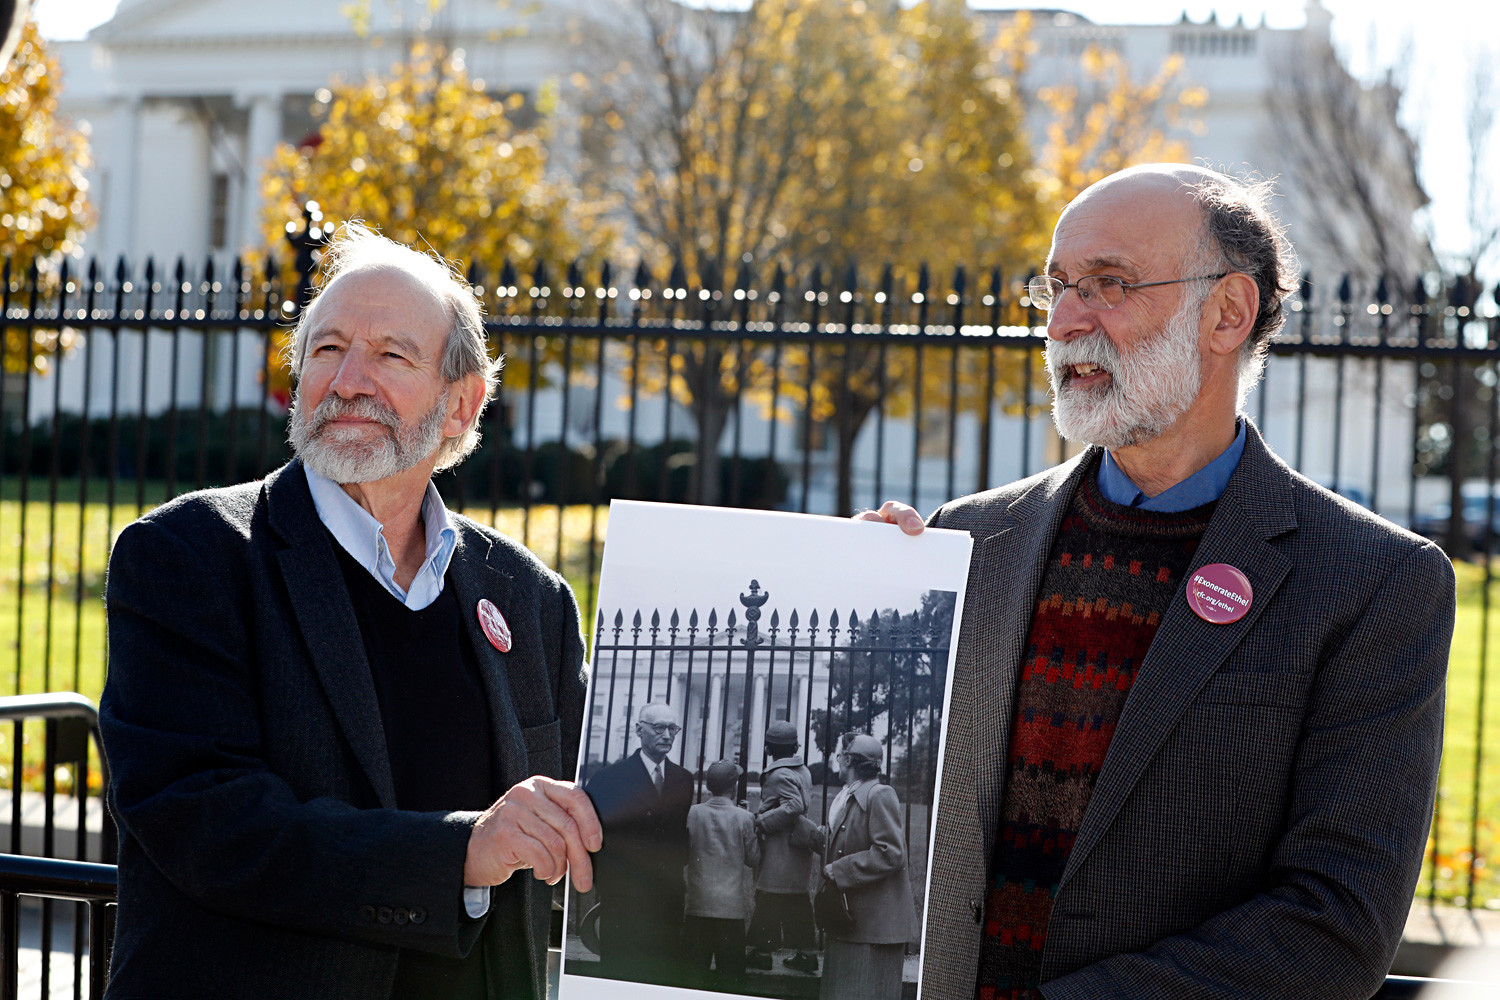 Michael, left, and Robert Meeropol, the sons of Ethel Rosenberg, pose similar to an old photograph of them, before they attempt to deliver a letter to President Barack Obama in an effort to obtain a exoneration for their mother Ethel Rosenberg, 2016. 